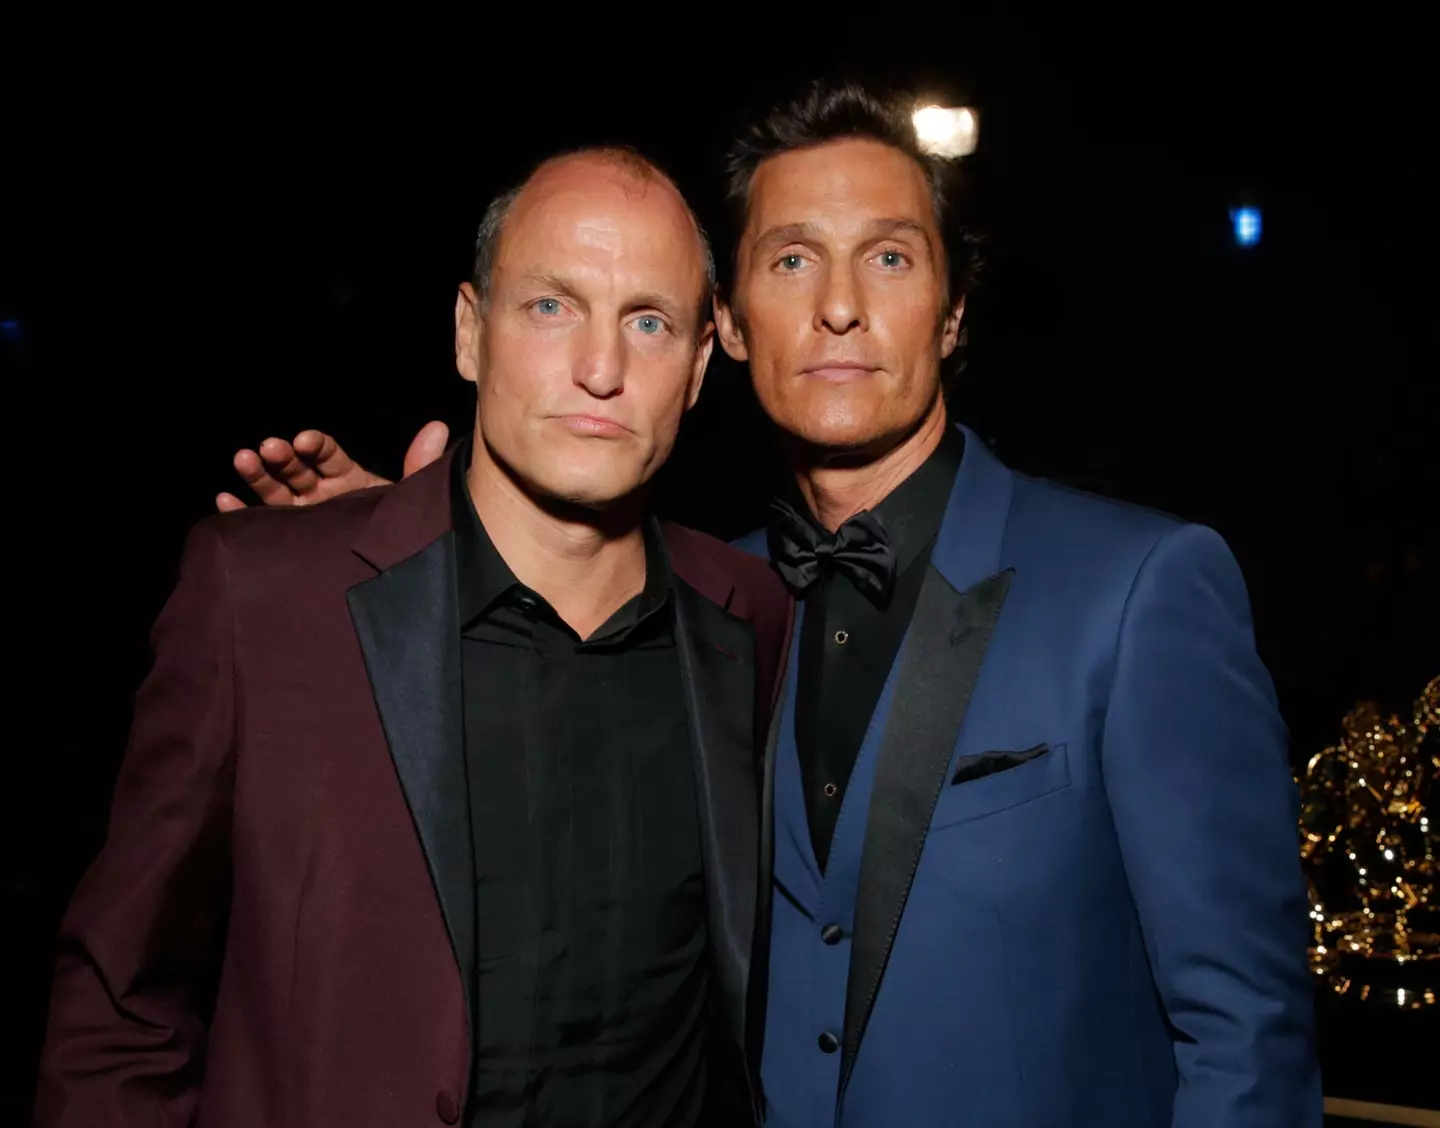 McConaughey and Harrelson have been friends for years.